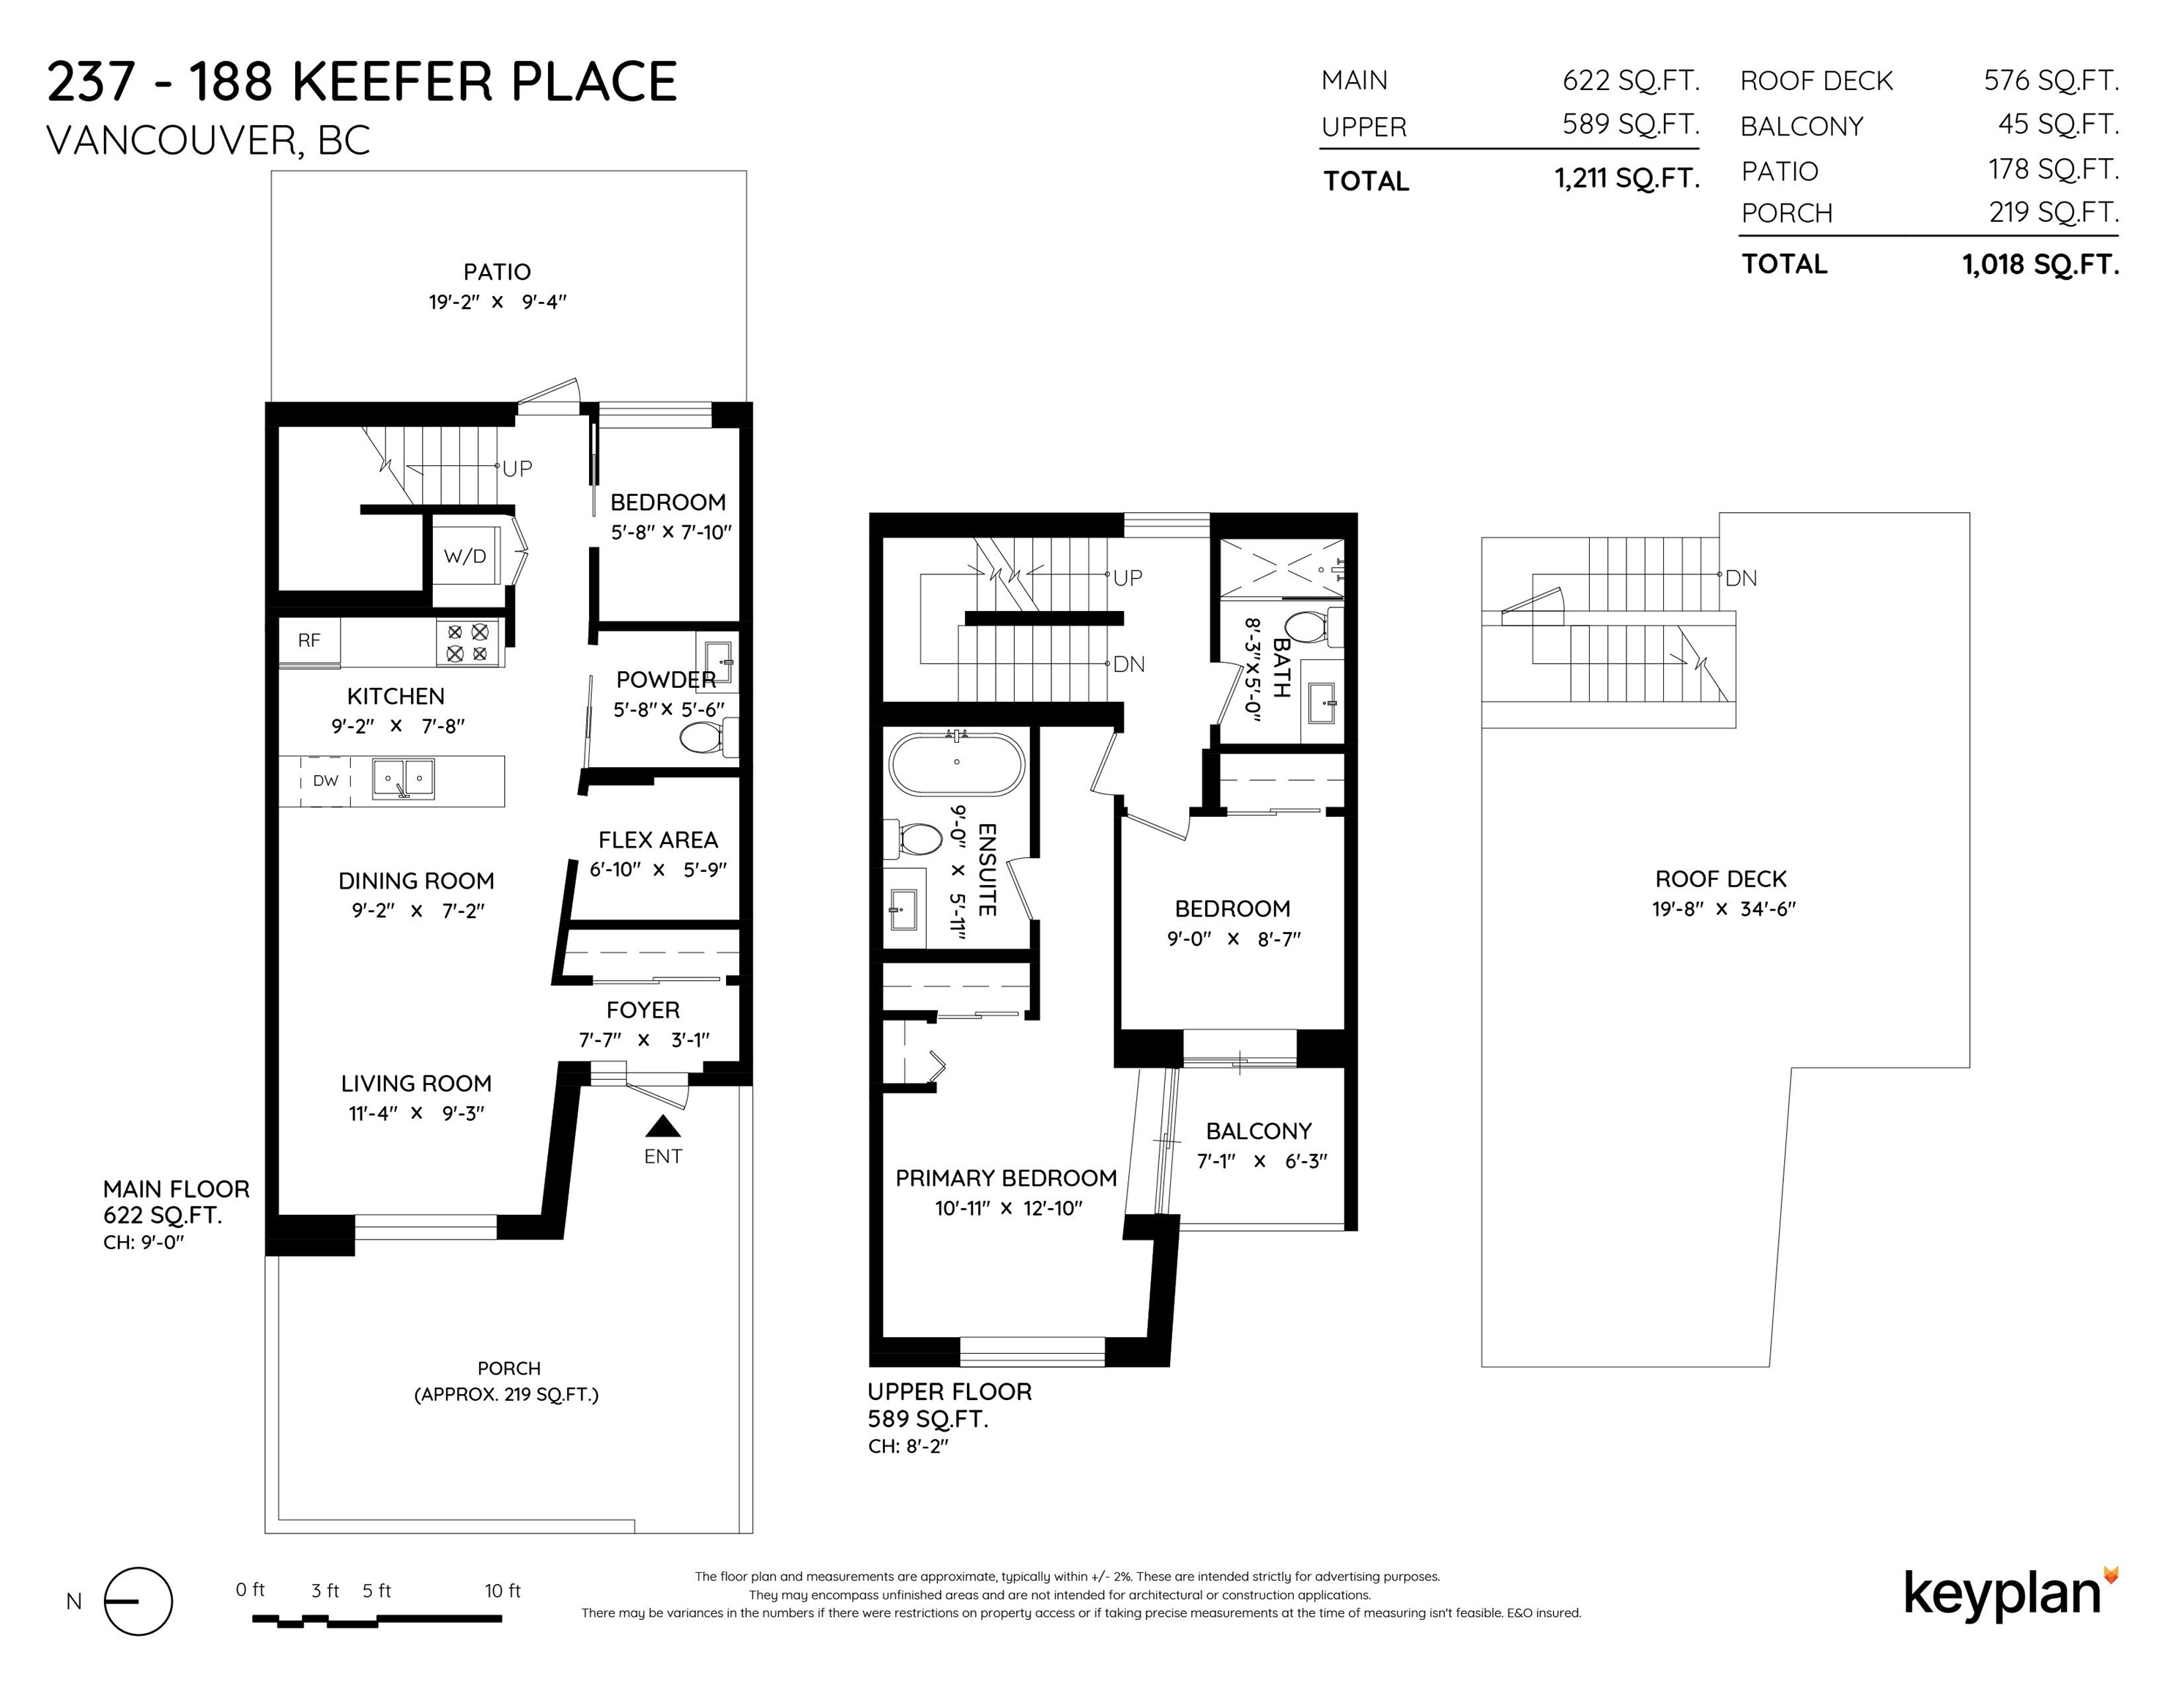 Listing image of TH 237 188 KEEFER PLACE